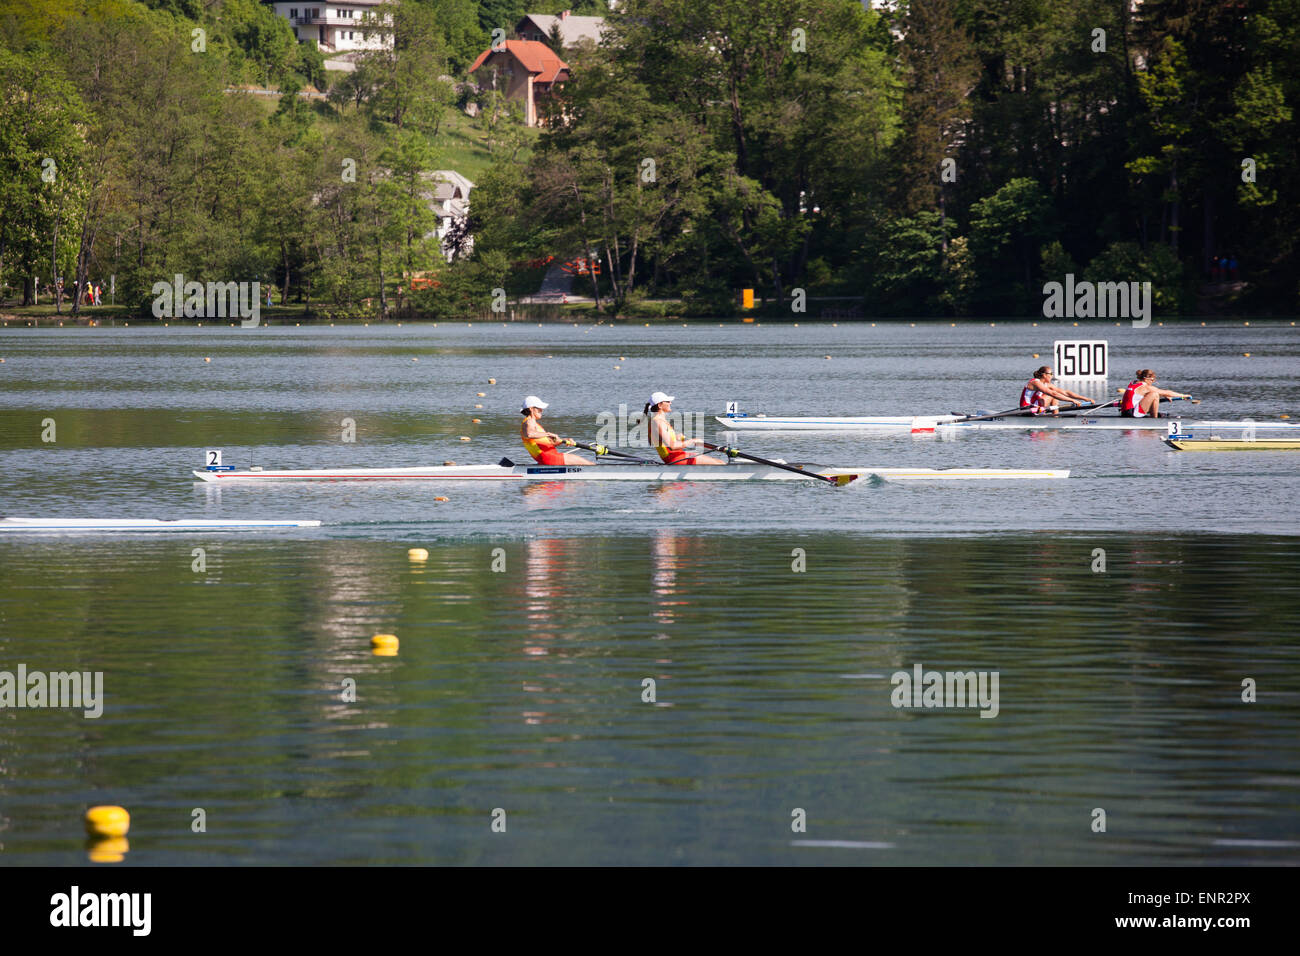 Lake Bled, Slovenia. 10th May, 2015. Team Spain  (Nuria Dominguez and Anna Boada), and team Poland (Anna Wierzbovska and  Maria Wierzbovska) during heat race of woman pair rowing on World Rowing Cup on lake Bled. Credit:  Nejc Trpin/Alamy Live News Stock Photo